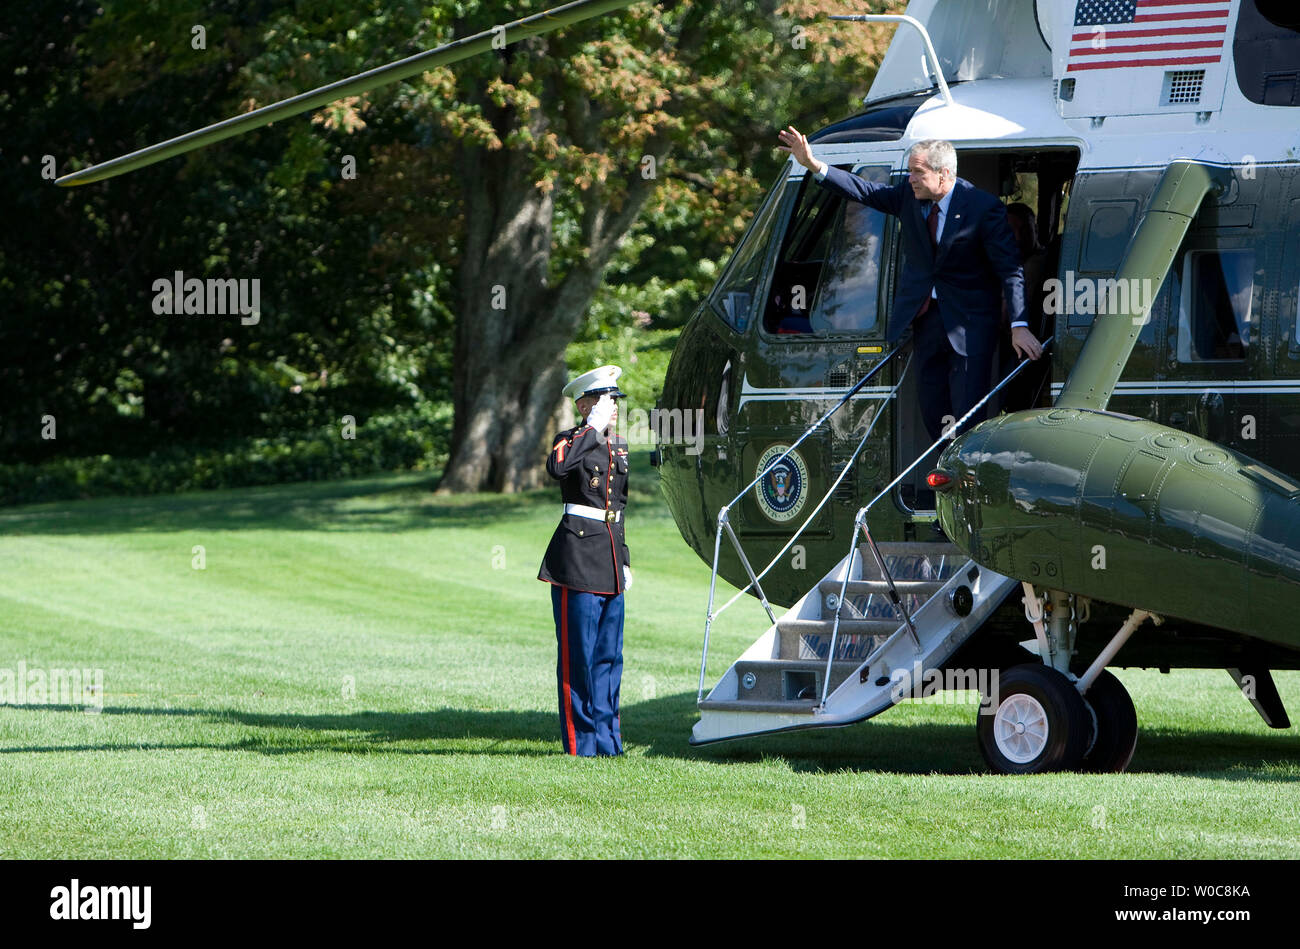 President George W. Bush waves as he steps off Marine One on the South Lawn at the White House in Washington on August 11, 2008. Bush has returned from attending some of the 2008 Olympics Games in Beijing. (UPI Photo/Patrick D. McDermott) Stock Photo